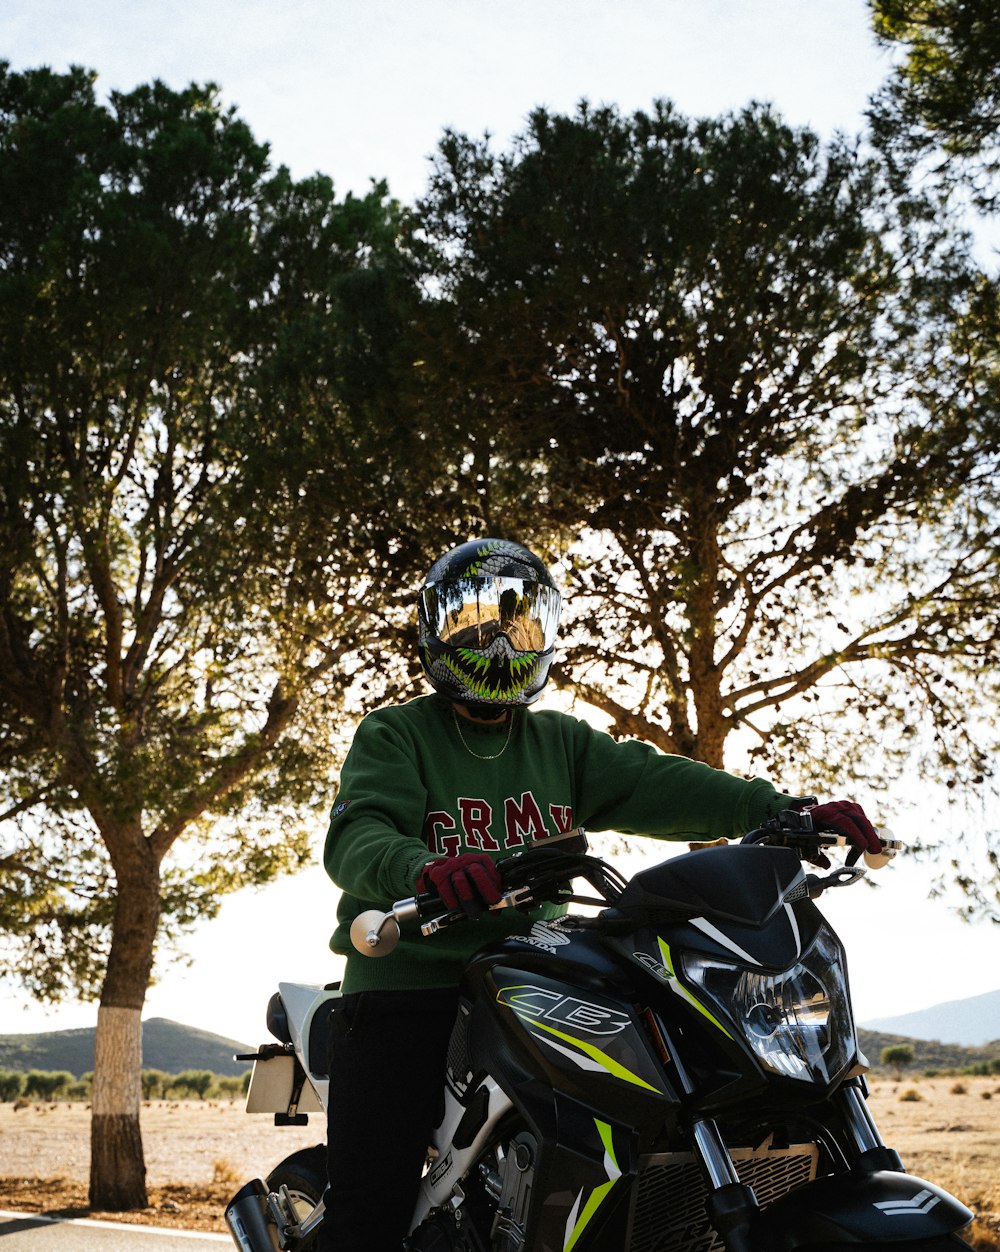 a person on a motorcycle with trees in the background